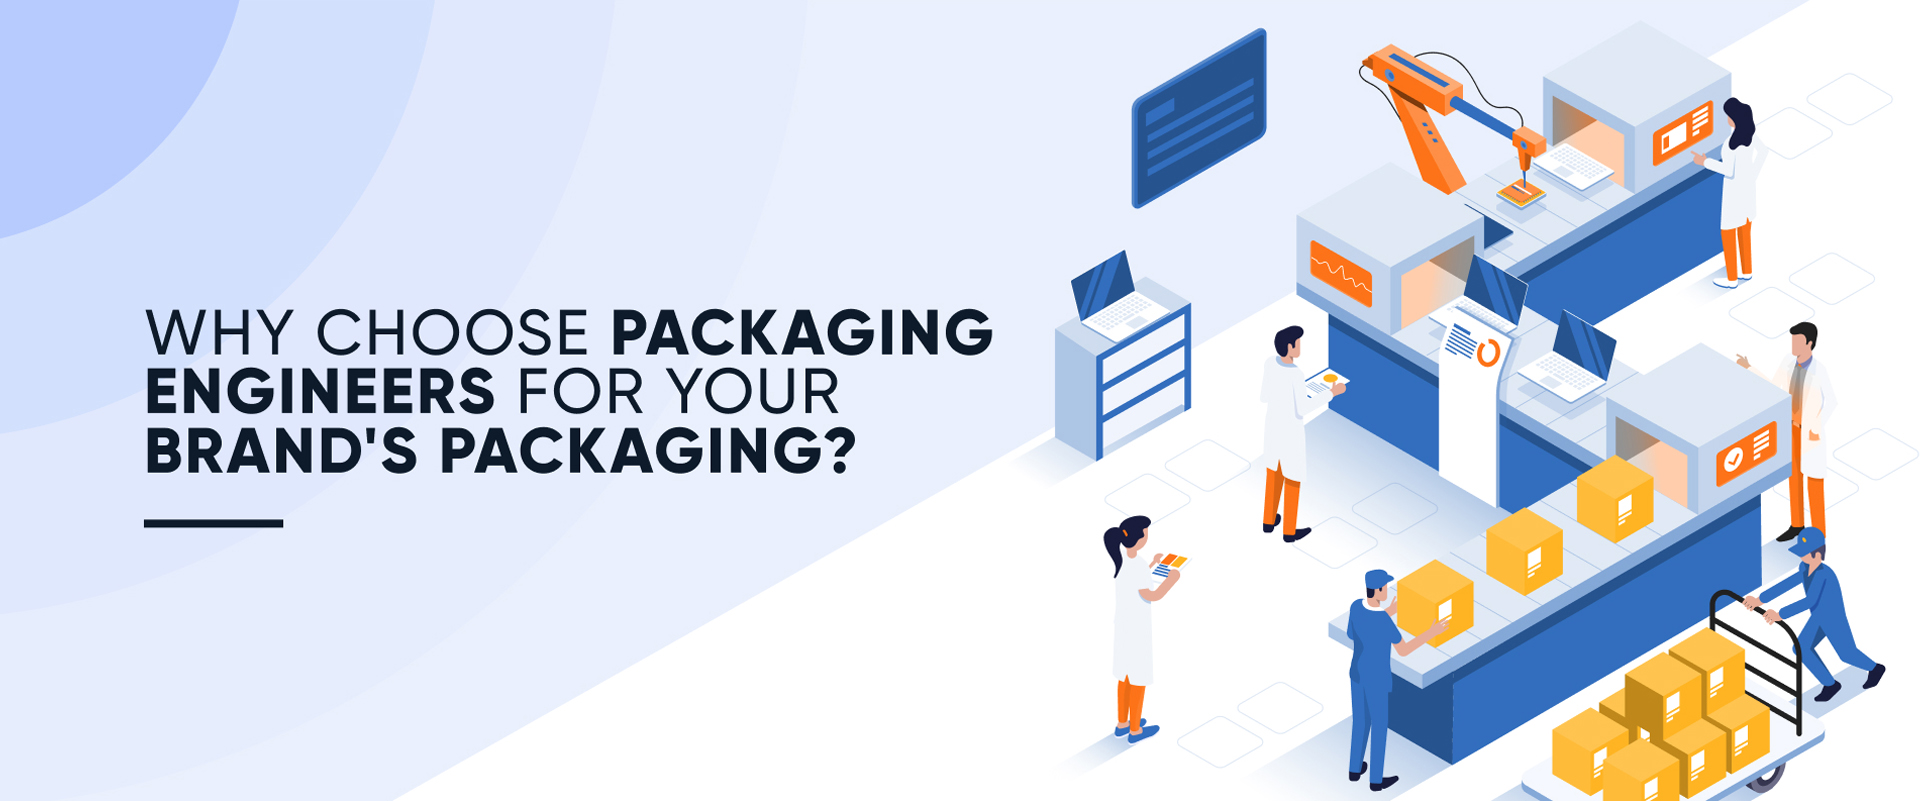 Why Choose Packaging Engineers for Your Brand’s Packaging?